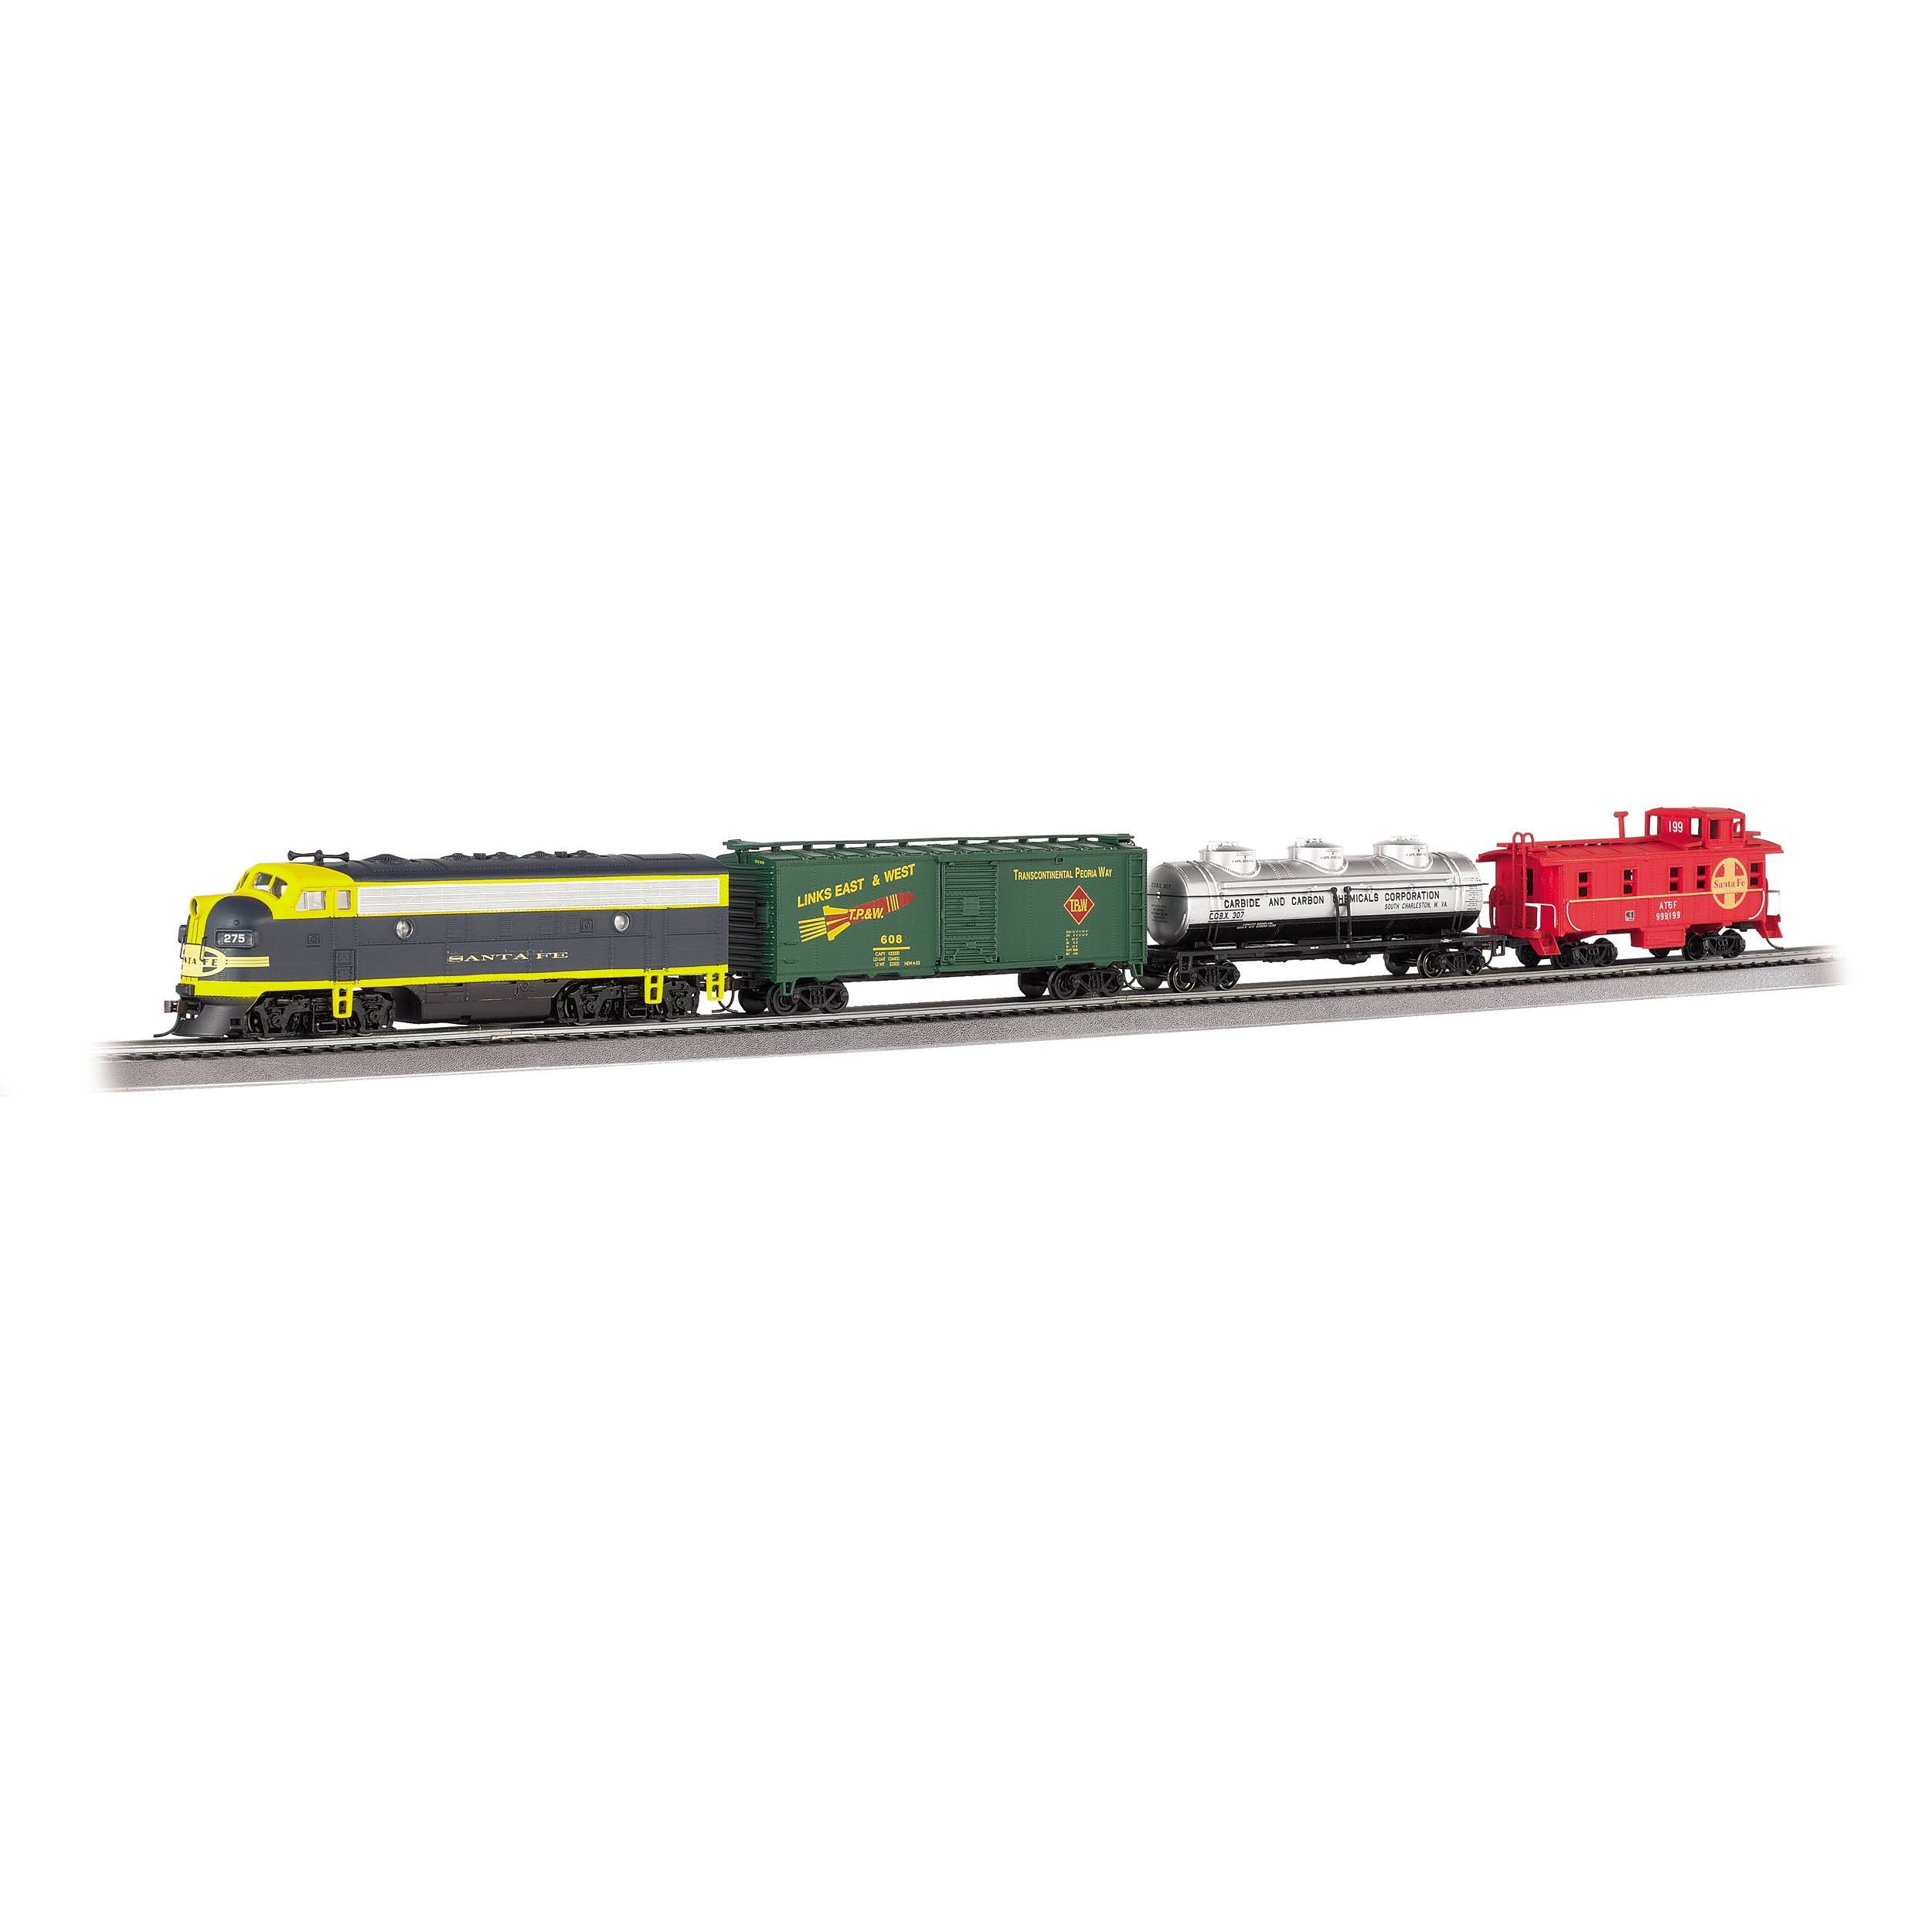 Bachmann Trains Thunder Chief Ready-to-Run Electric Train Toy Set - with Sound Value Equipped Locomotive, HO Scale